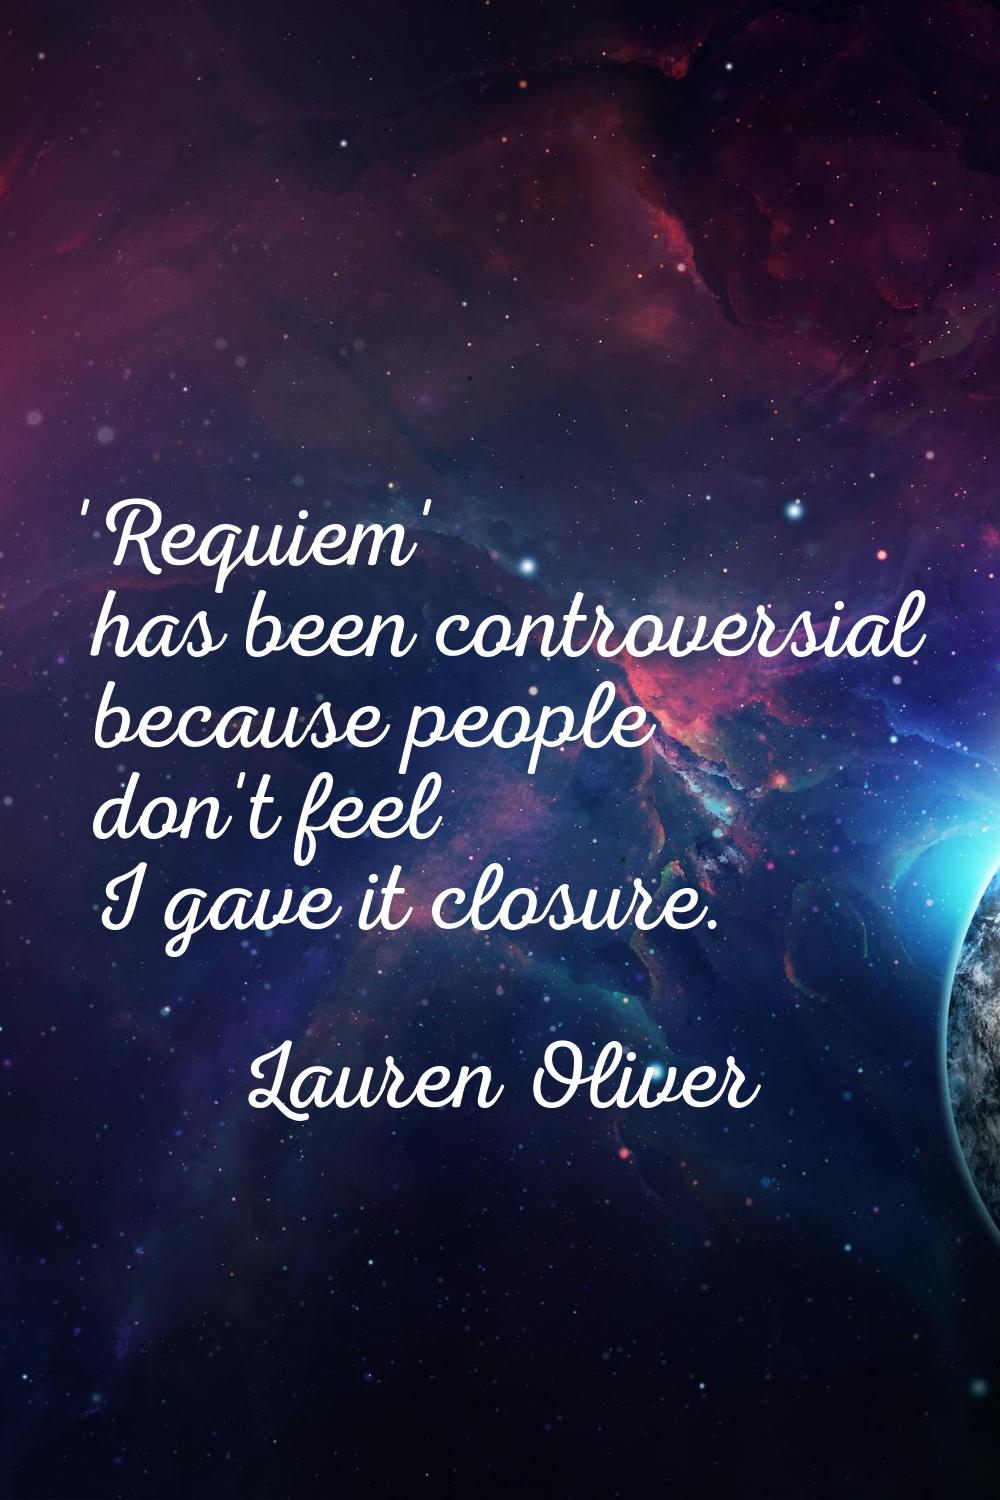 'Requiem' has been controversial because people don't feel I gave it closure.